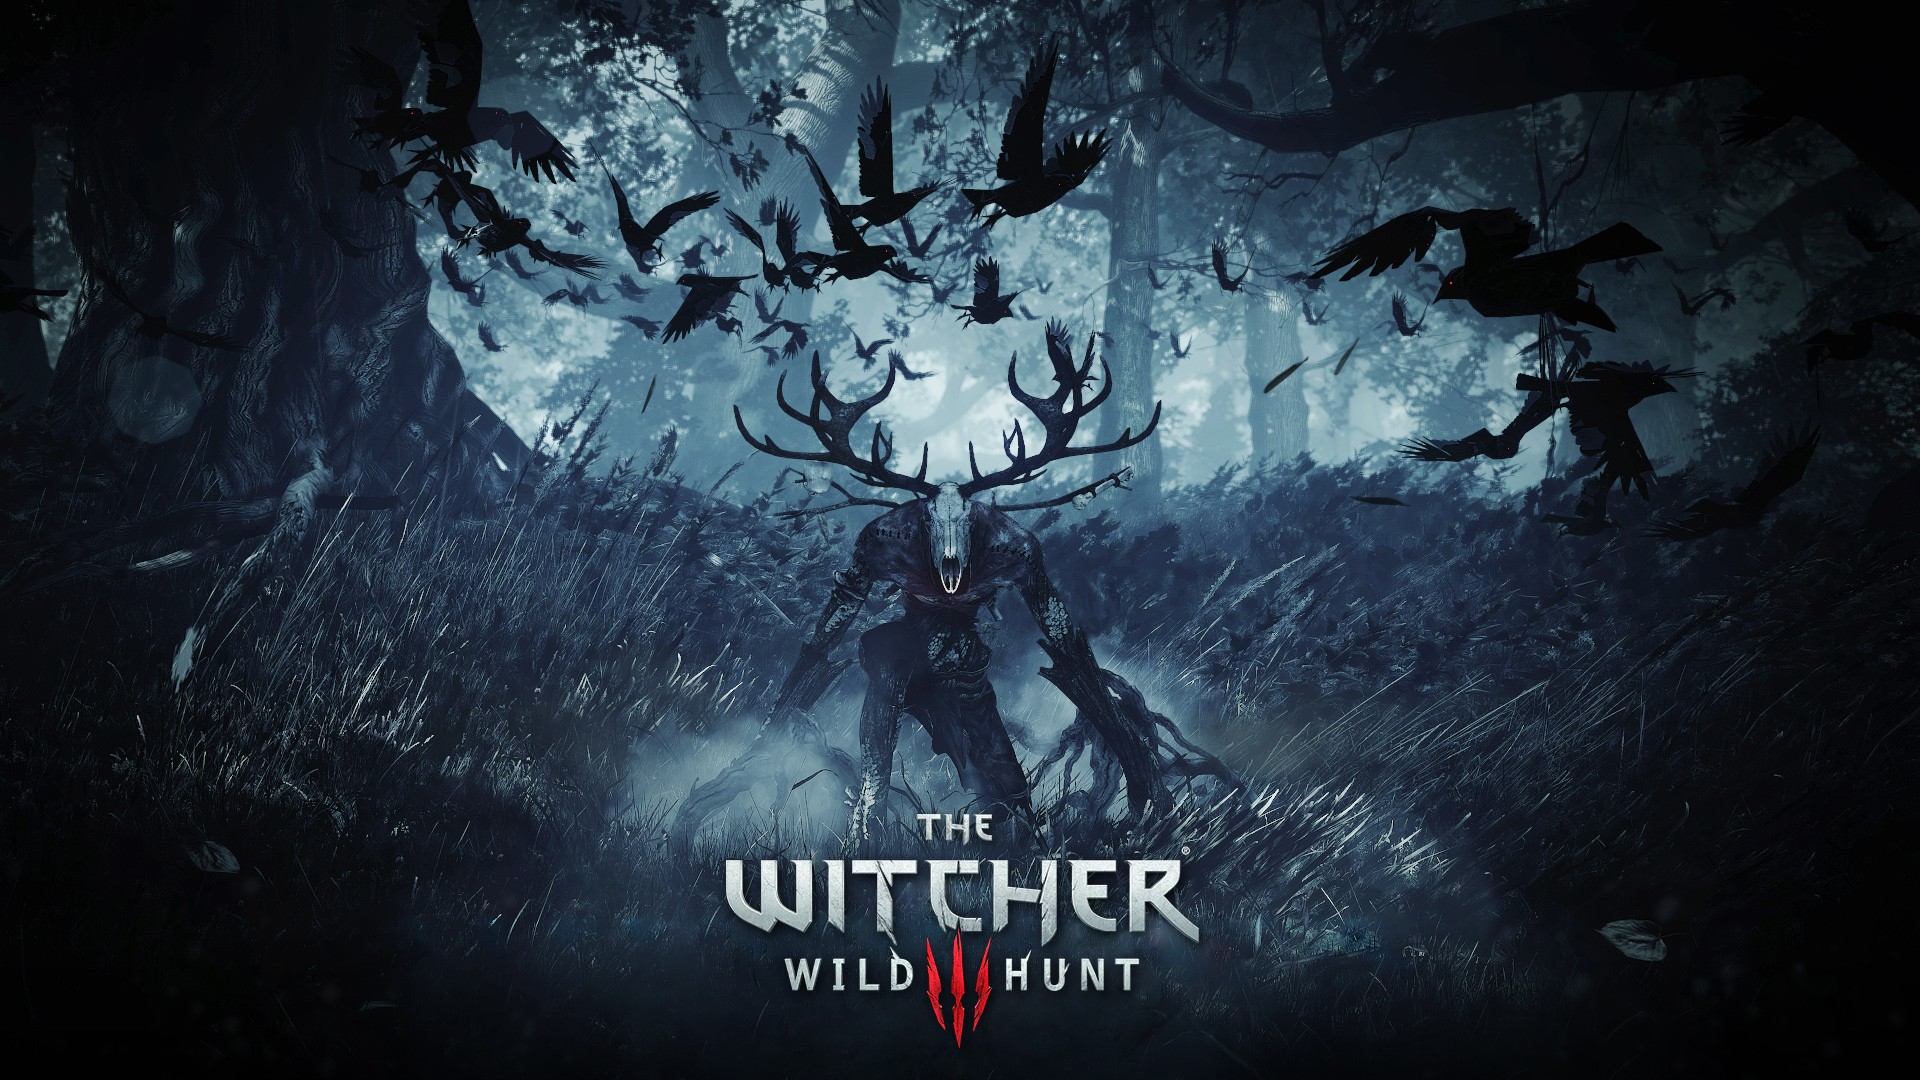 The Witcher, The Witcher 3: Wild Hunt Wallpaper